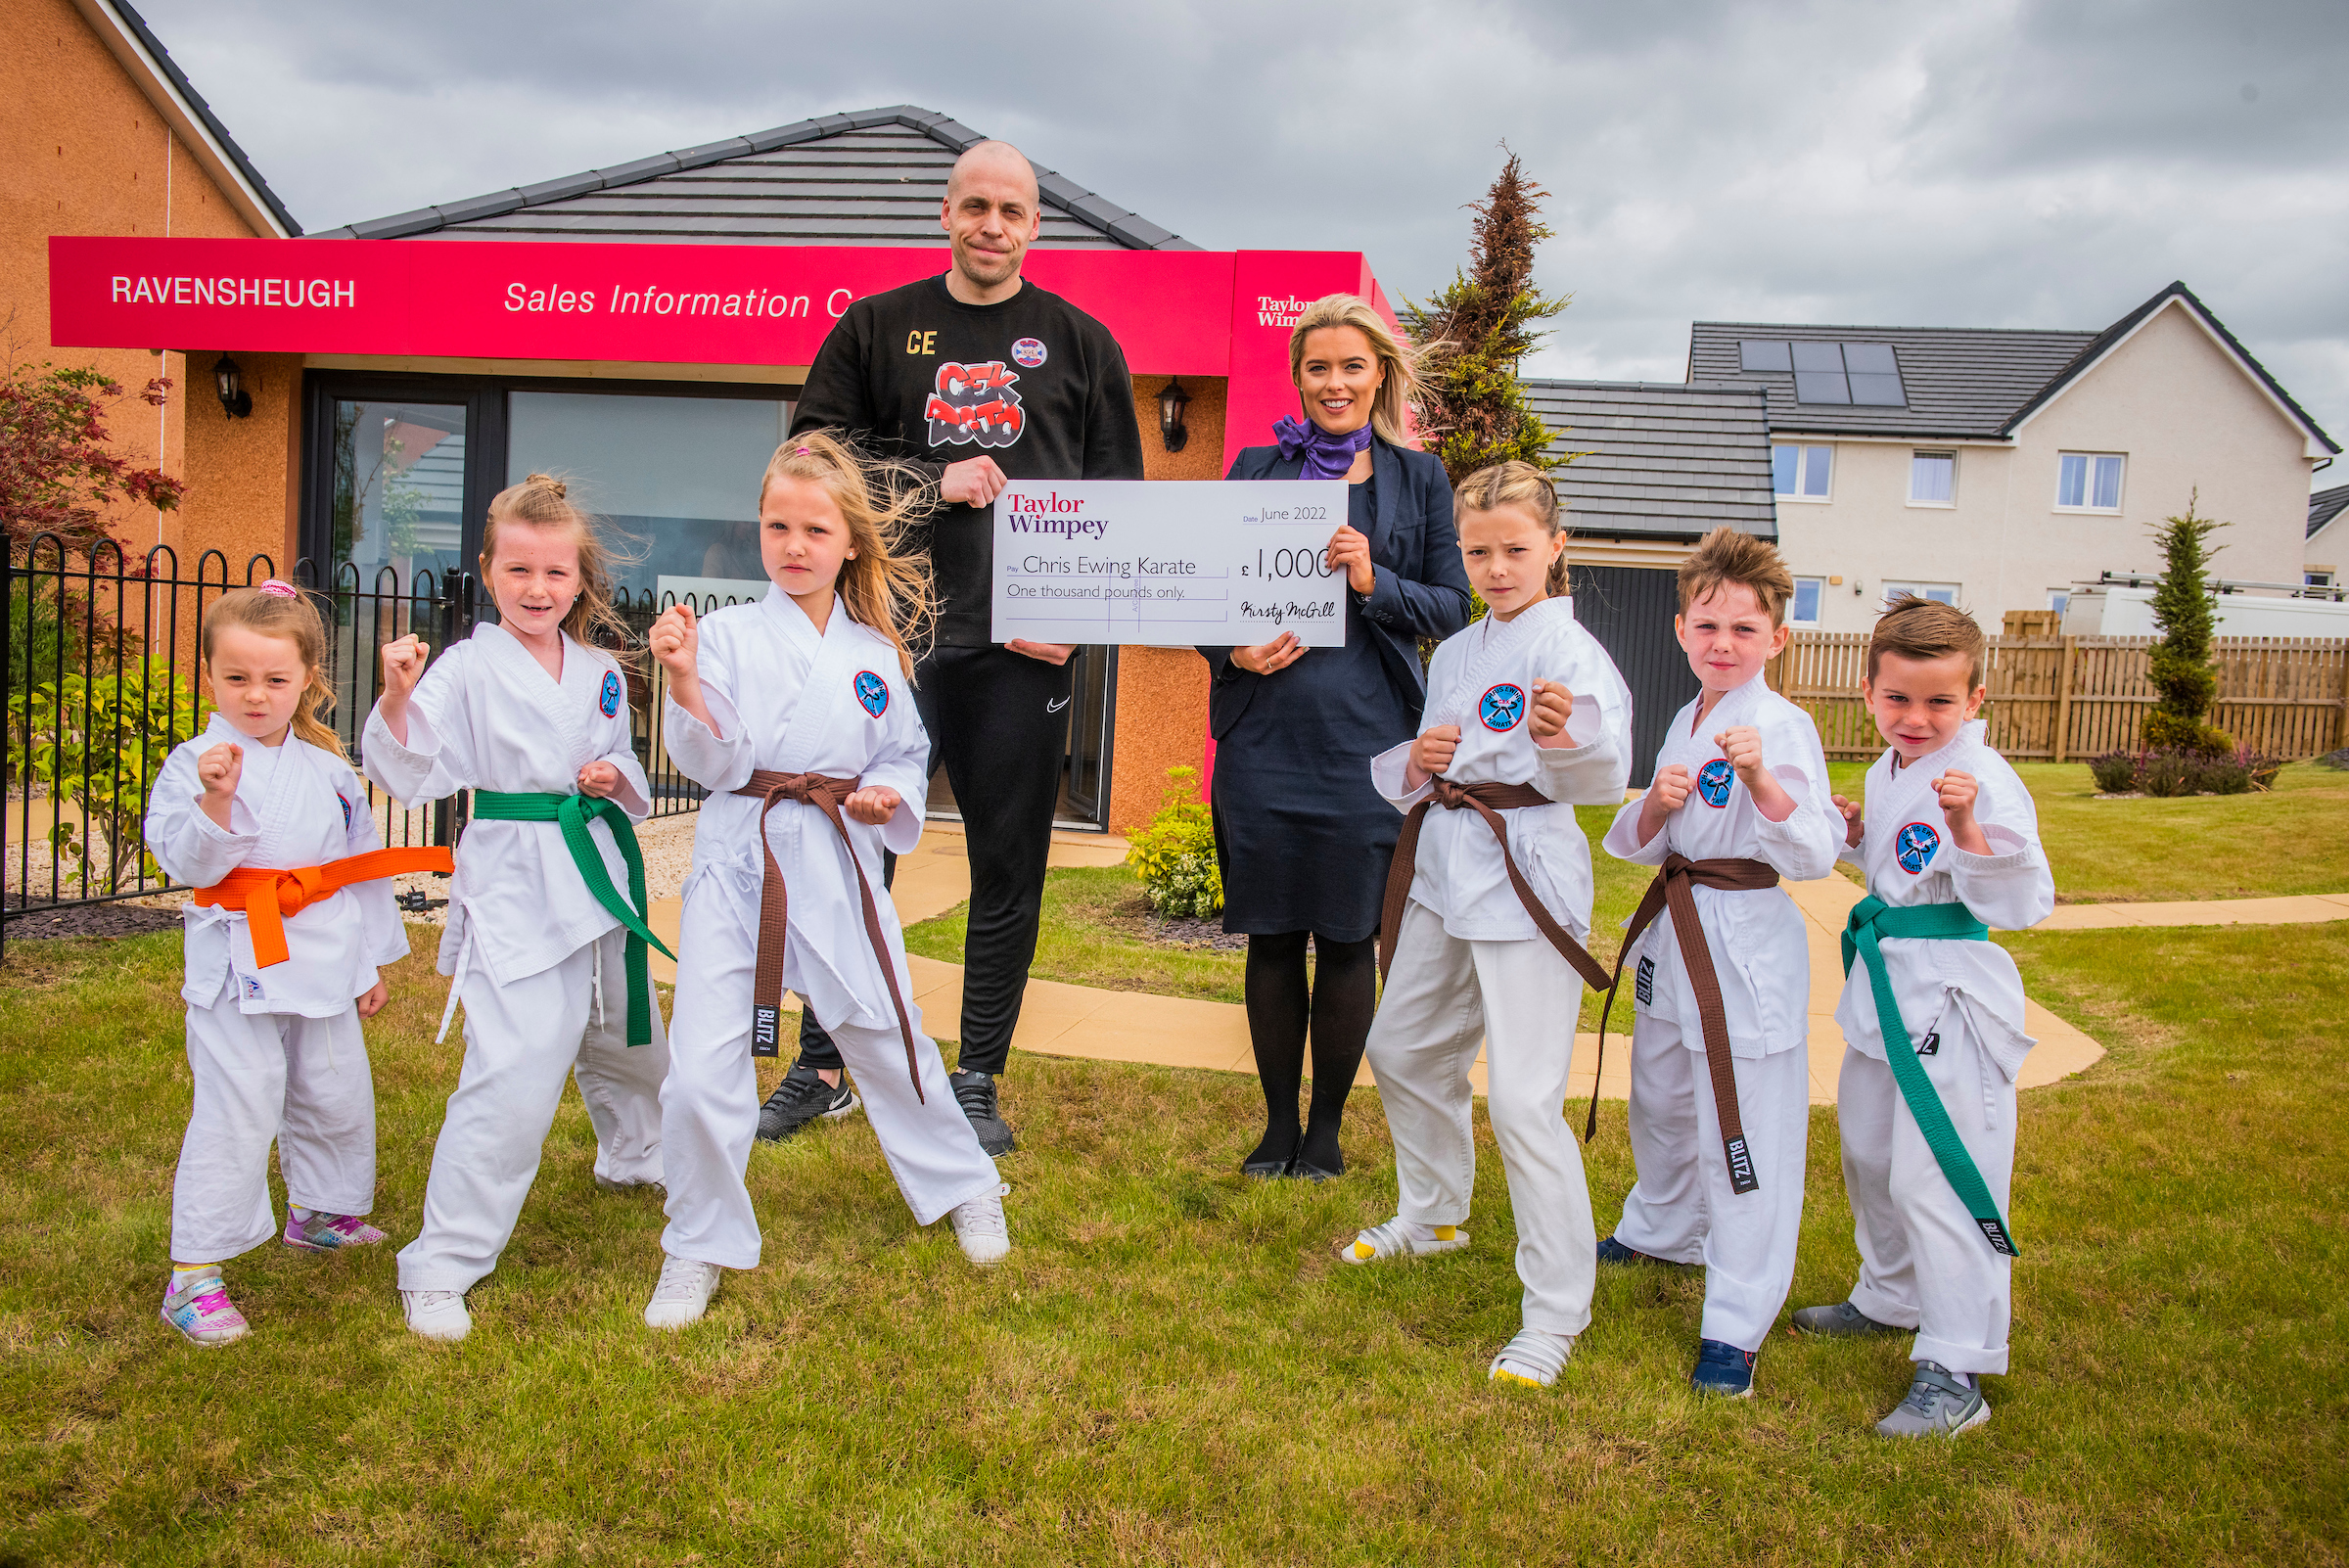 Children’s karate club receives a helping hand from Taylor Wimpey